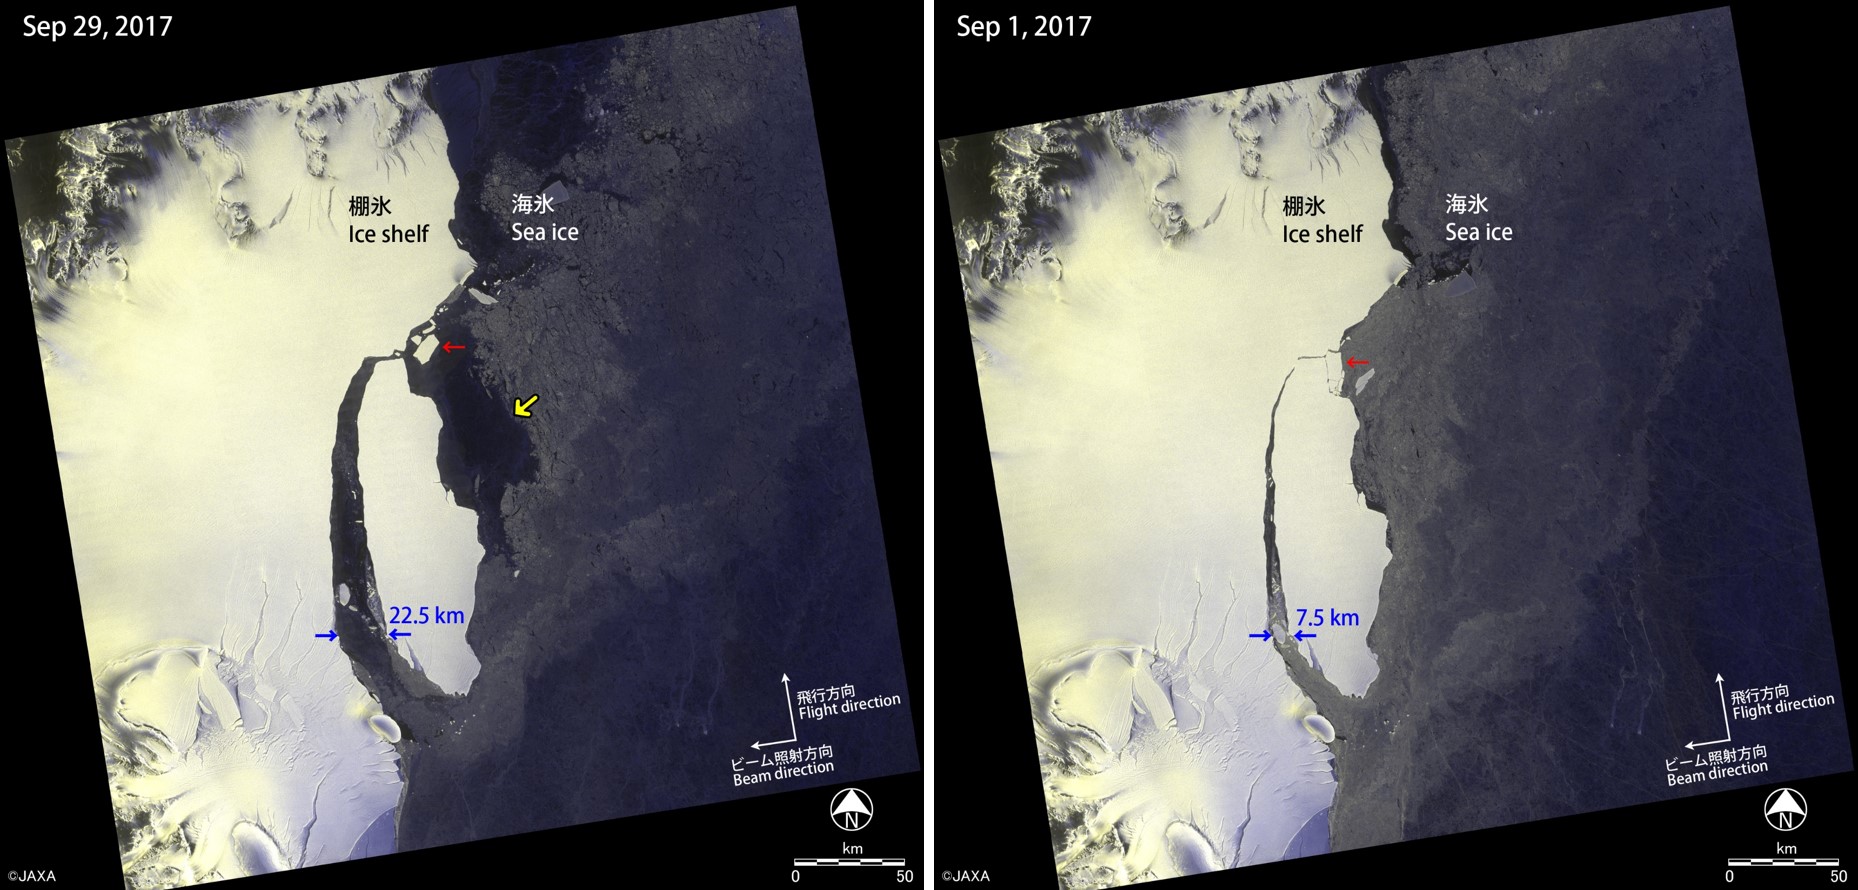 Fig.6: Interactive comparison of images on 29th September, 2017 (left) and 1st September, 2017 (right).